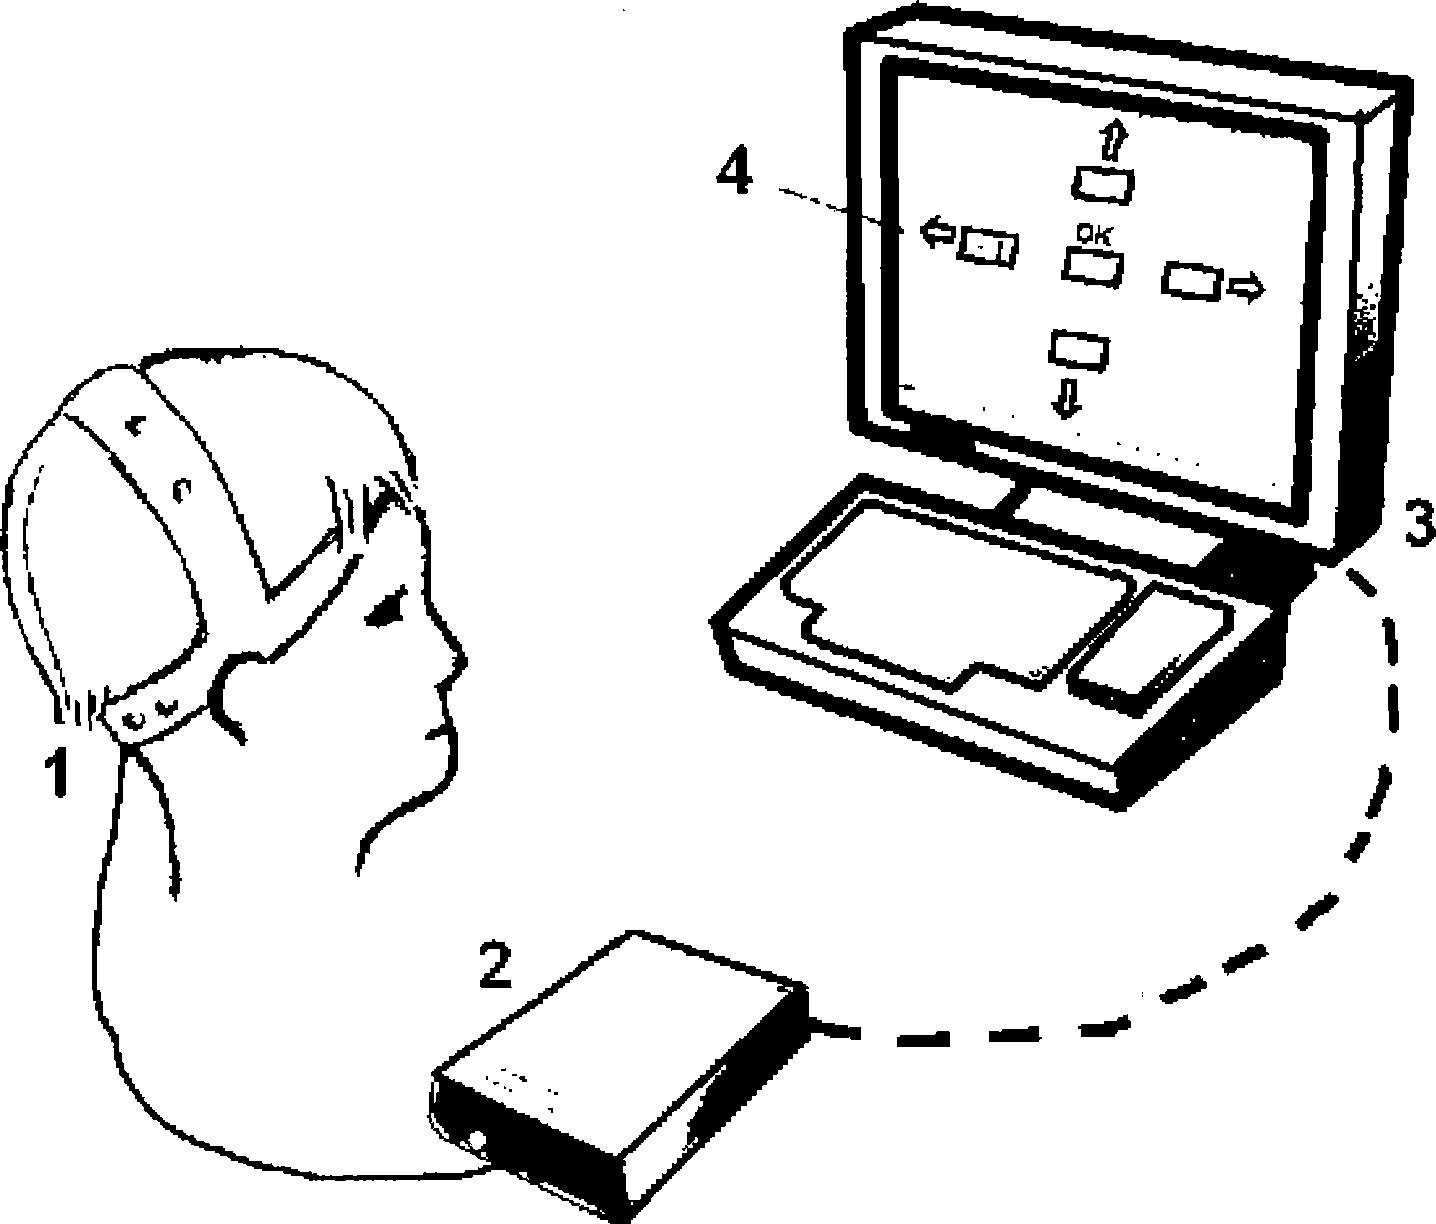 Human-machine interaction method with vision movement related neural signal as carrier